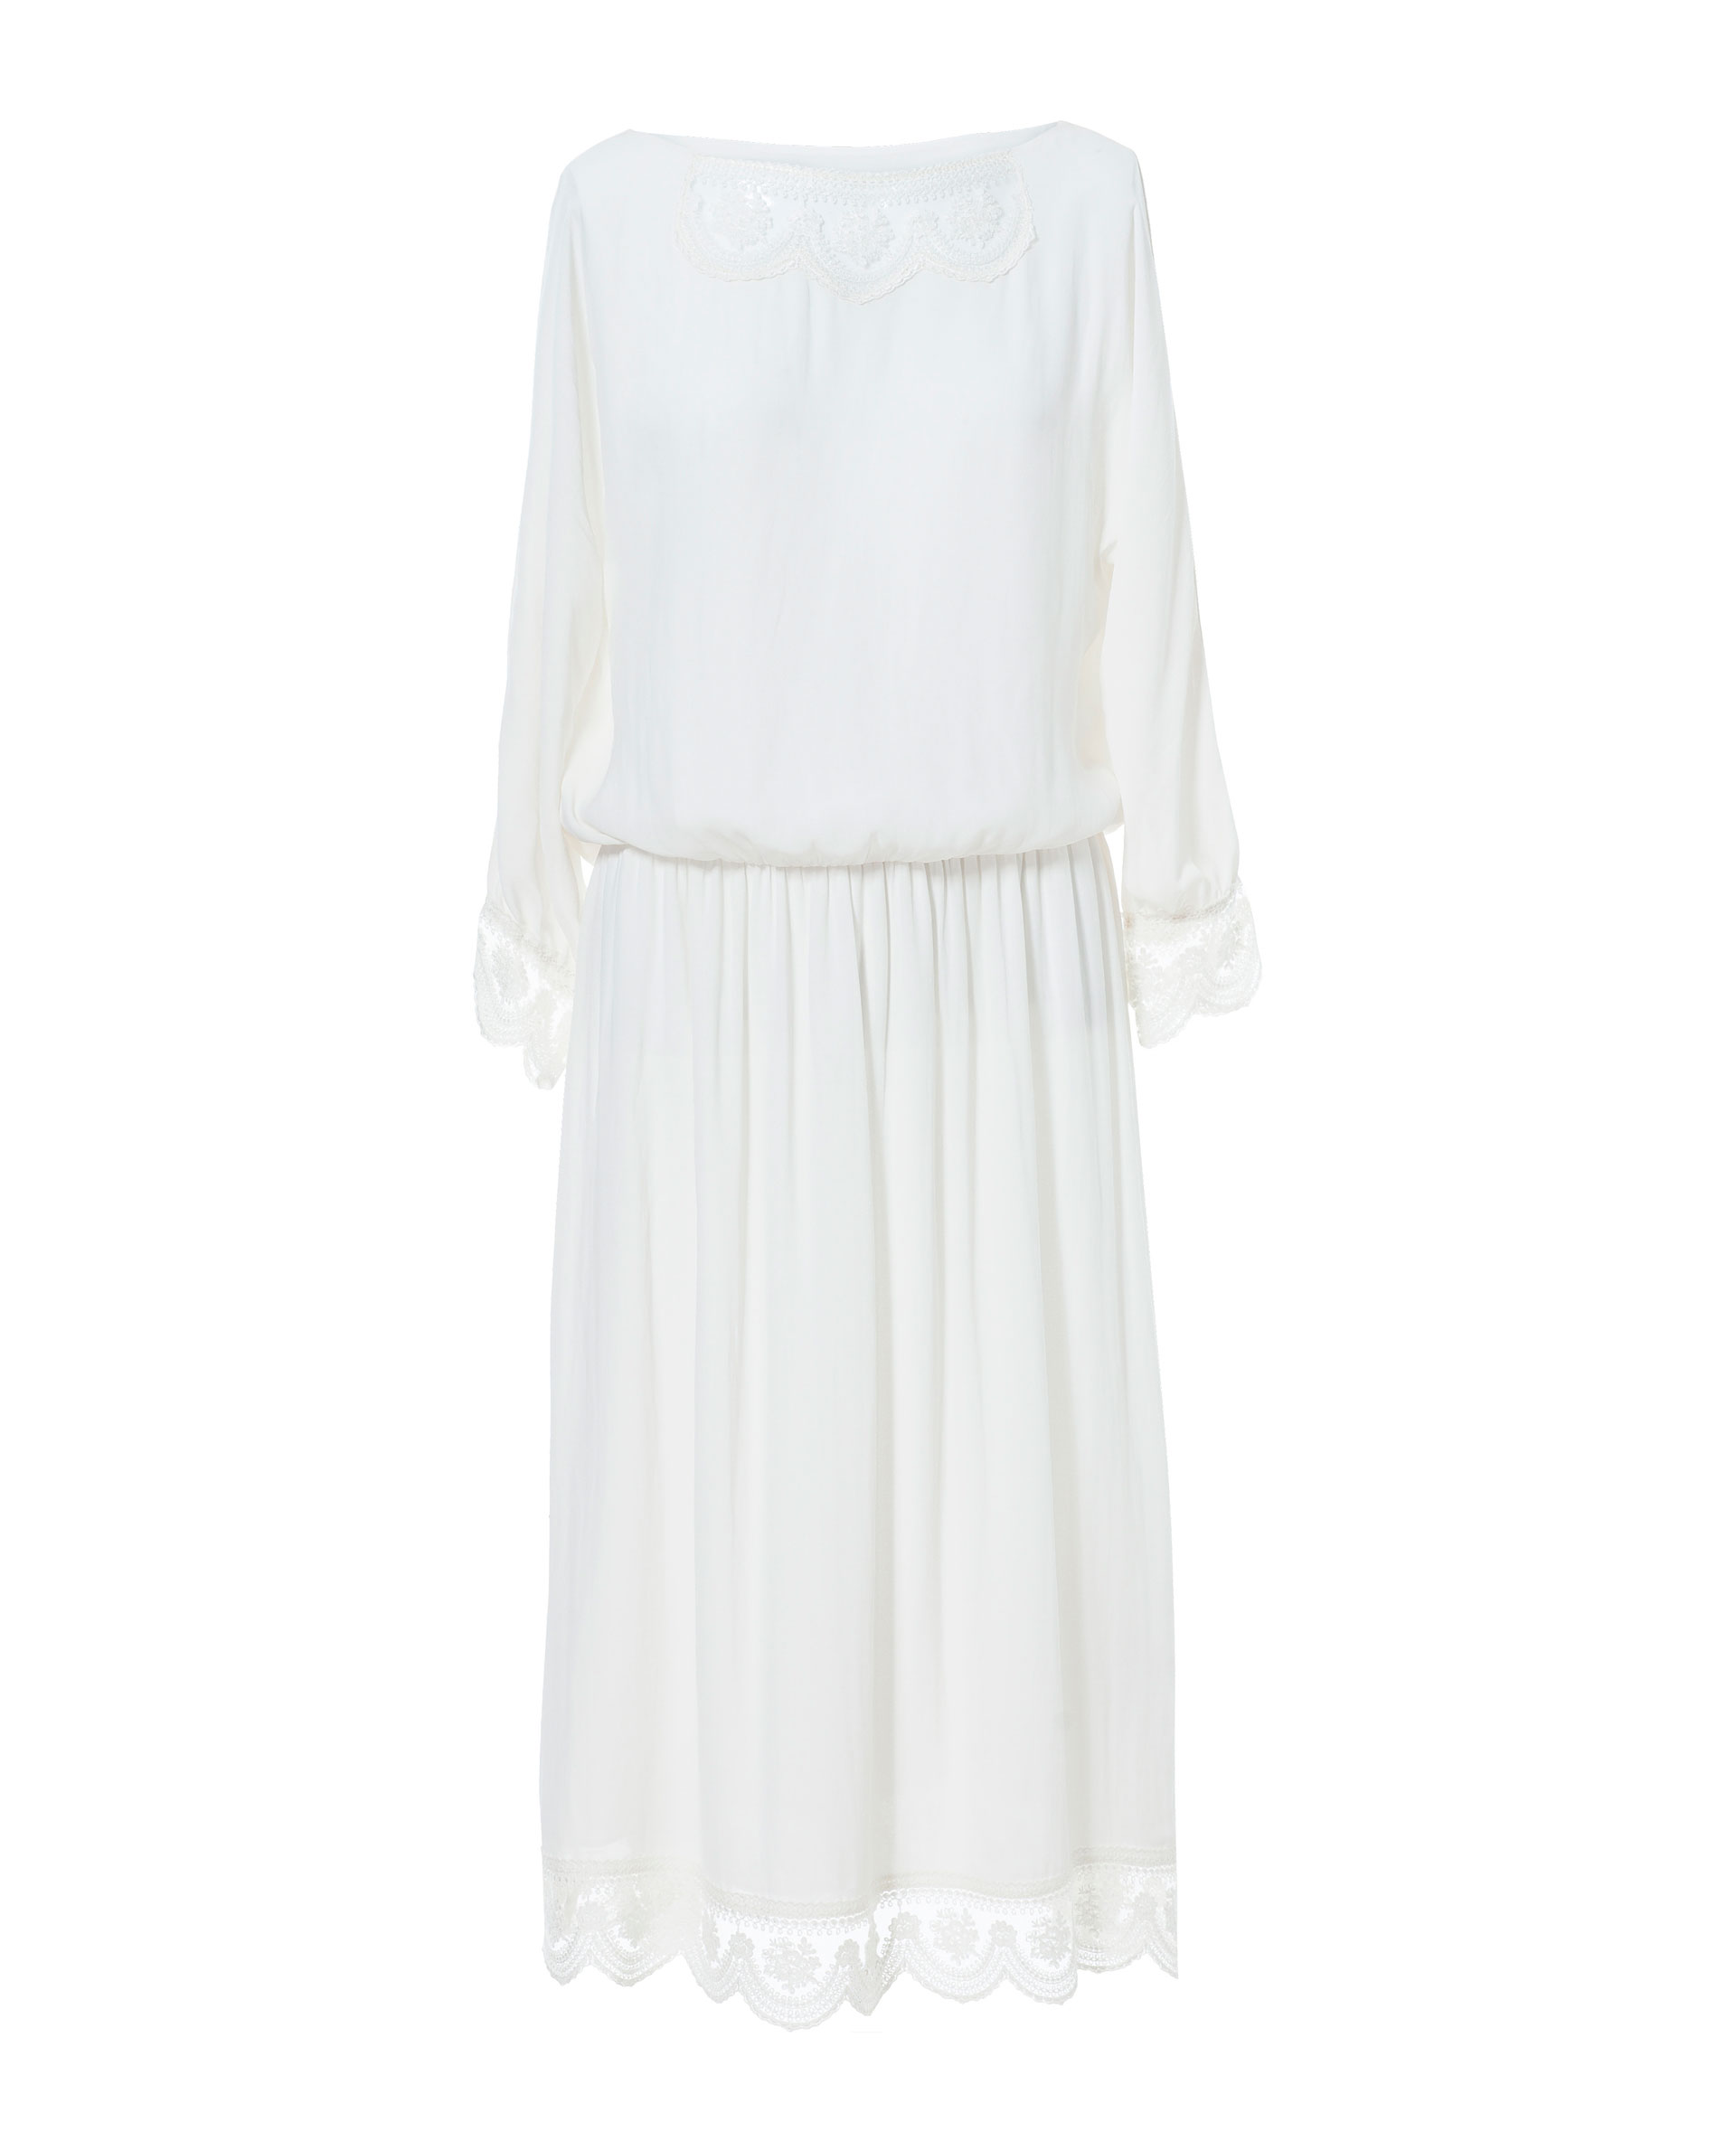 Zara Long Dress with Lace Trimming in White | Lyst